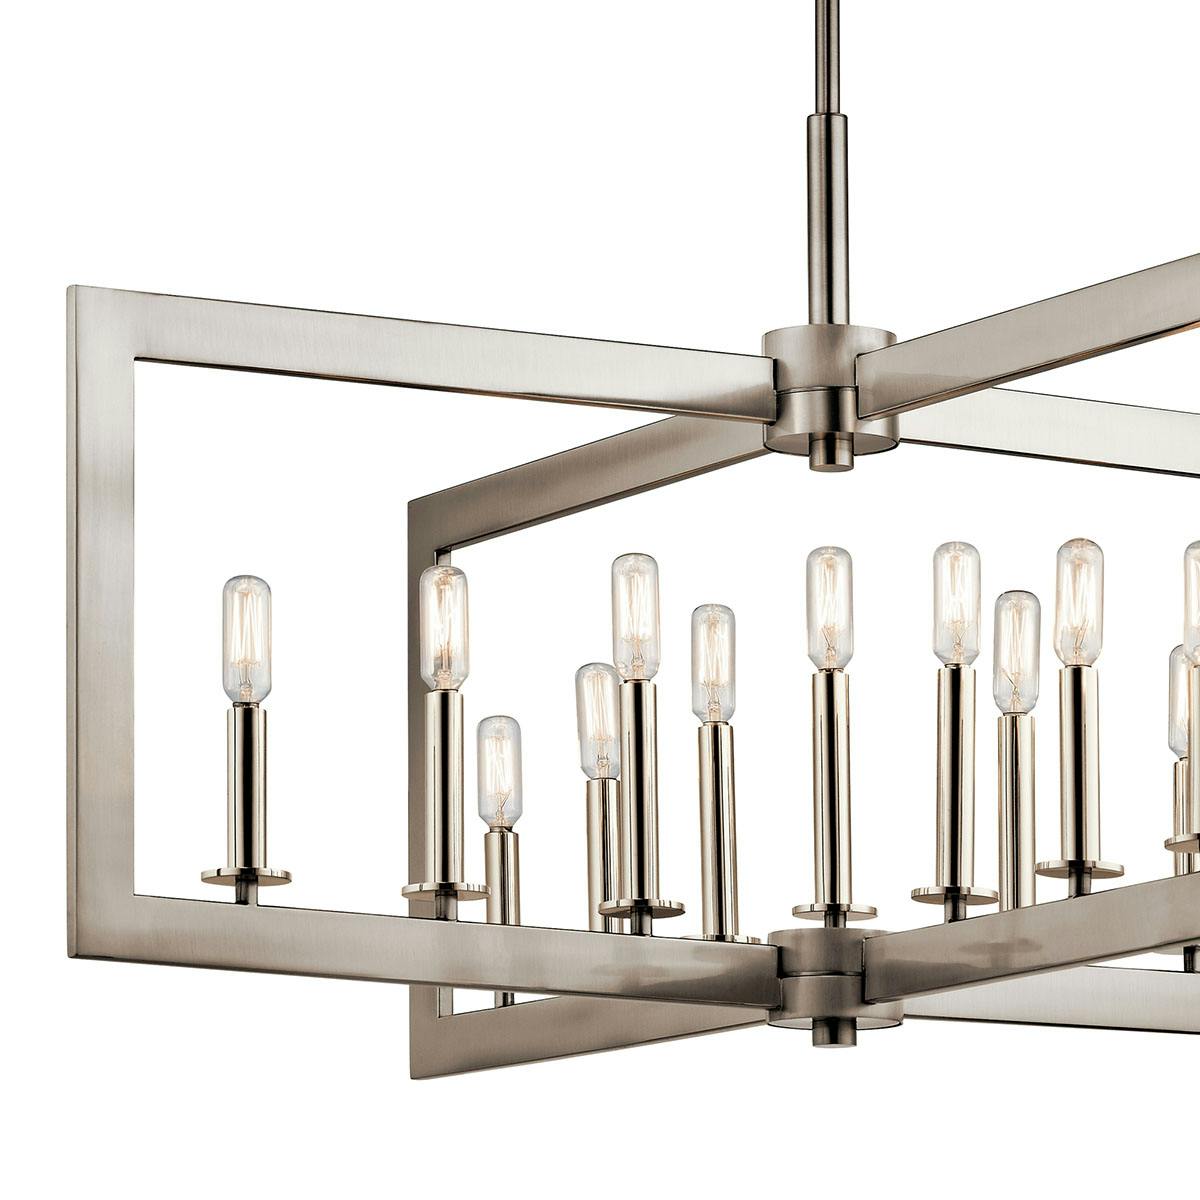 Close up view of the Cullen 13 Light Linear Chandelier Pewter on a white background